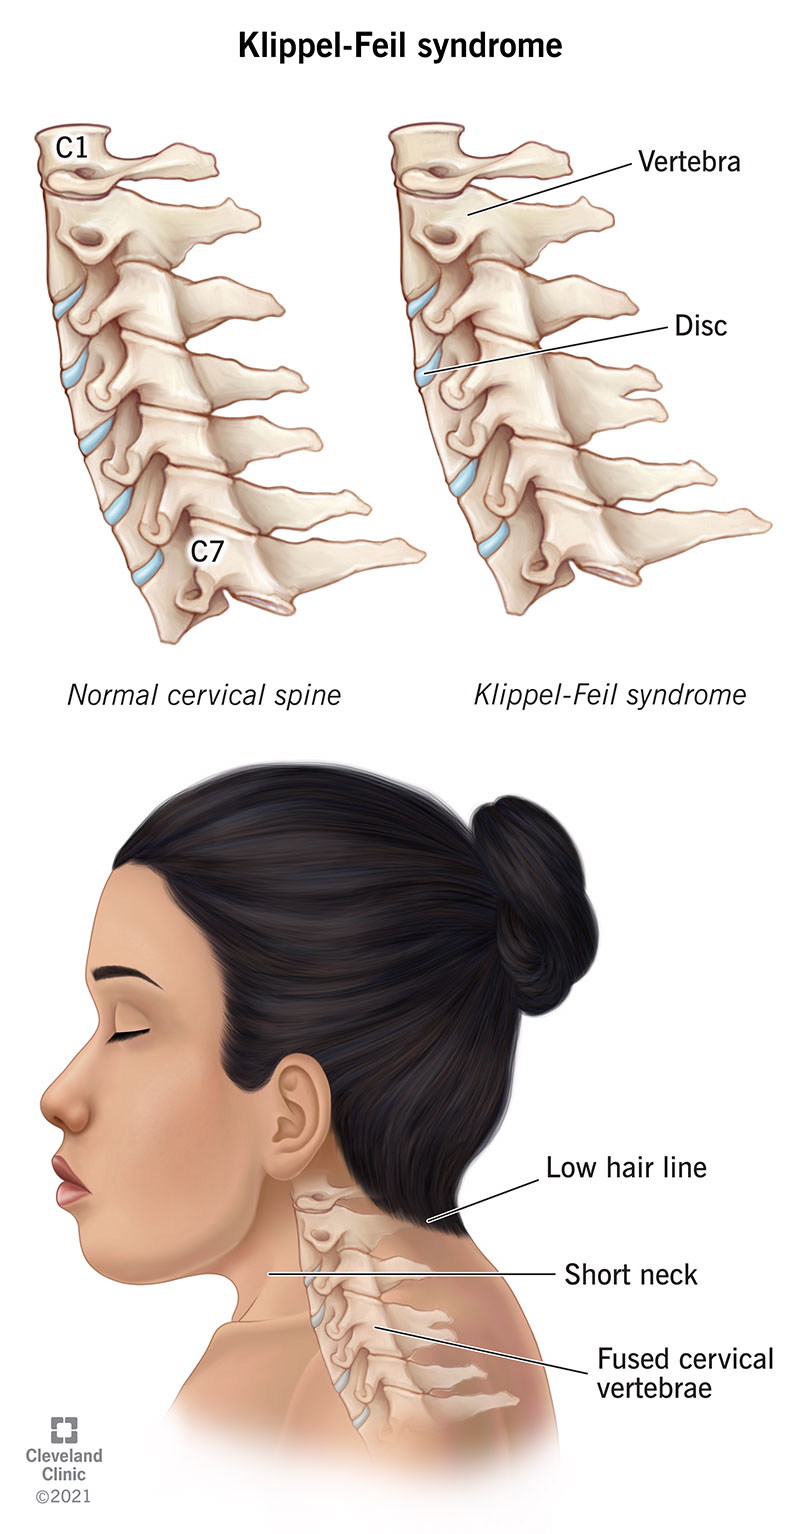 A woman with Klippel-Feil syndrome.